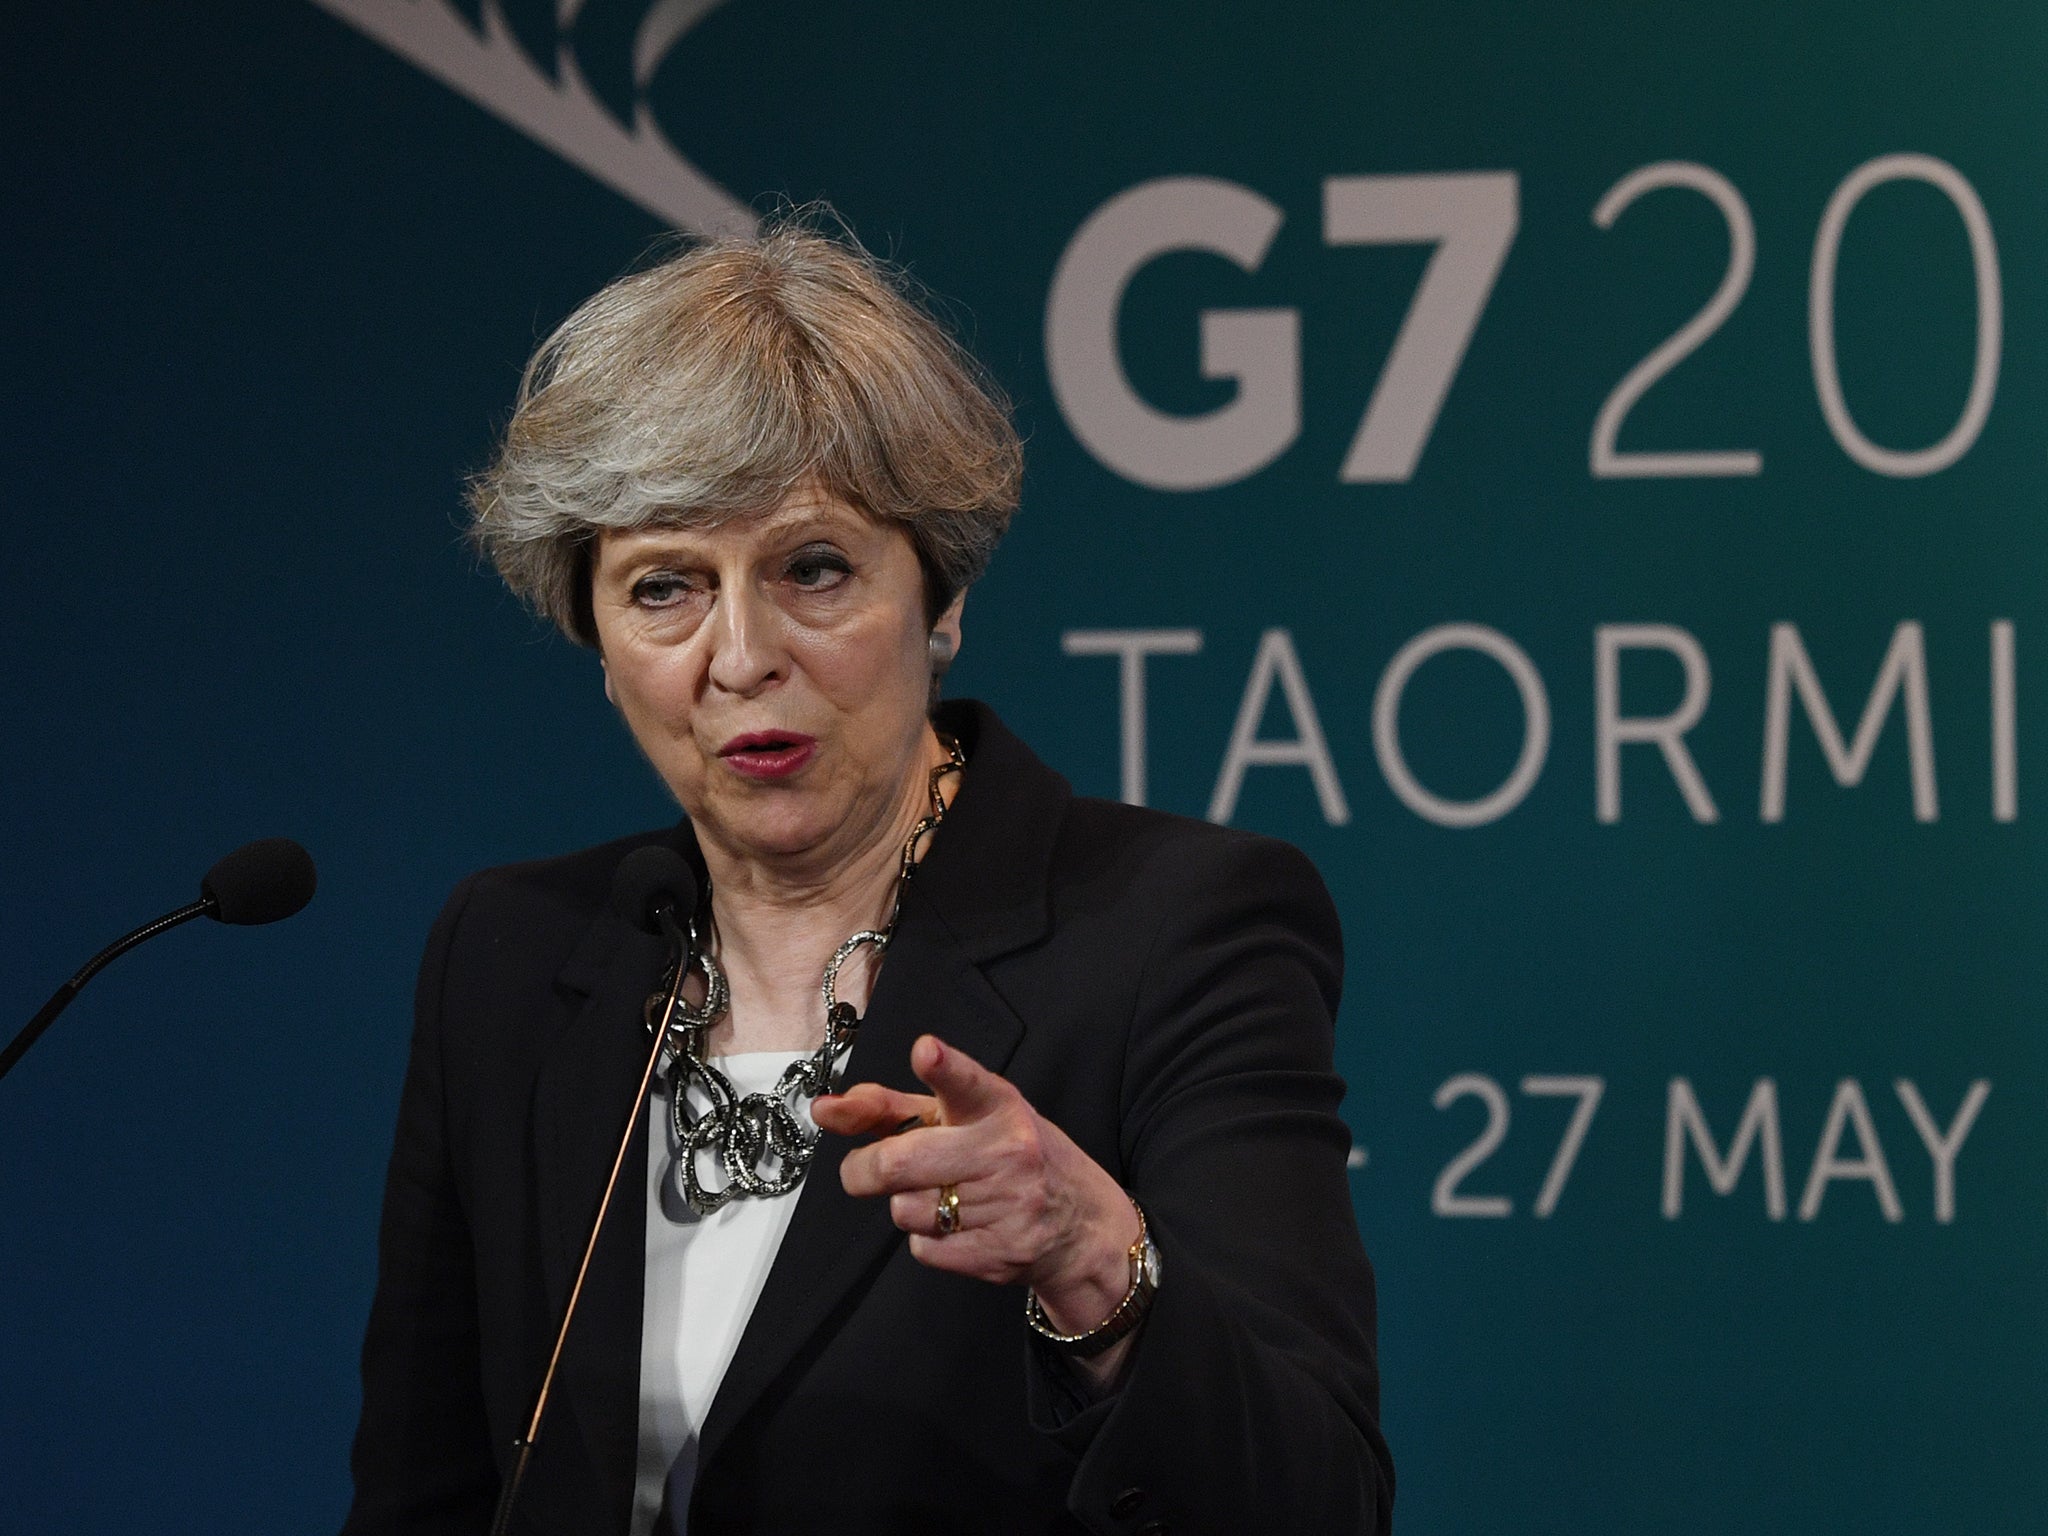 Prime Minister Theresa May speaks during a press conference at the G7 summit